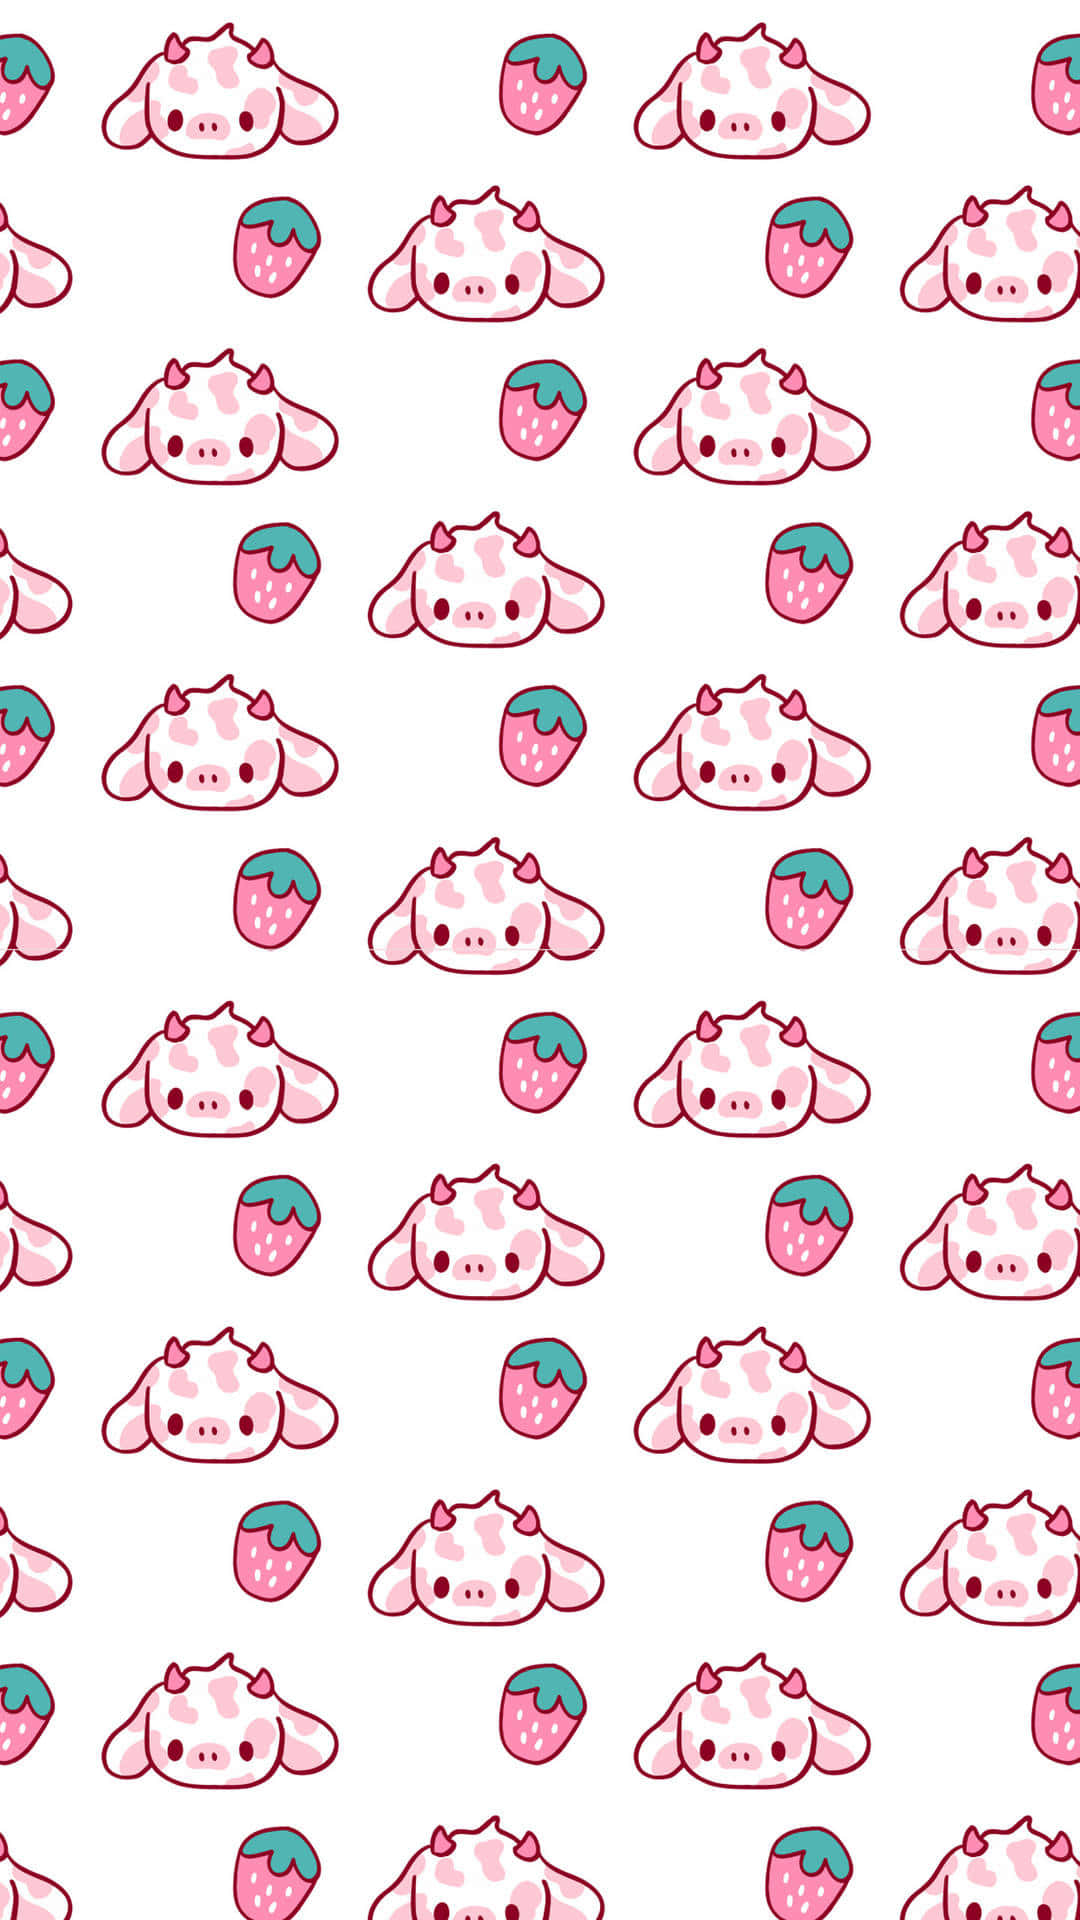 Whimsical Strawberry Cow Wallpaper